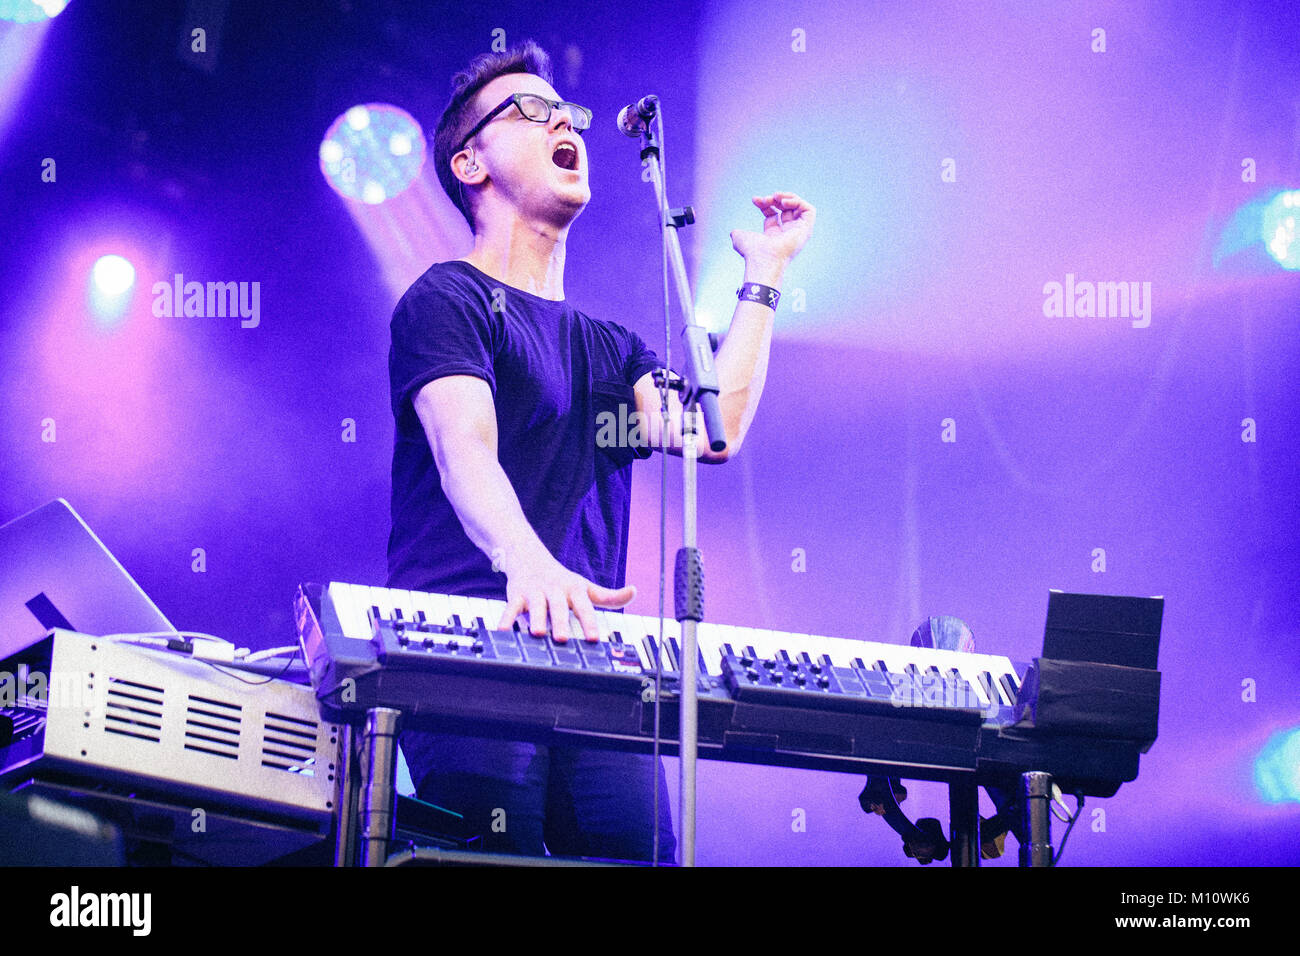 The American band Son Lux performs a live concert at the Polish music festival Off Festival 2015 in Katowice. The band consists of singer Ryan Lott (pictured), guitarist Rafiq Bhatia and drummer Ian Chang. Poland, 09/08 2015. Stock Photo